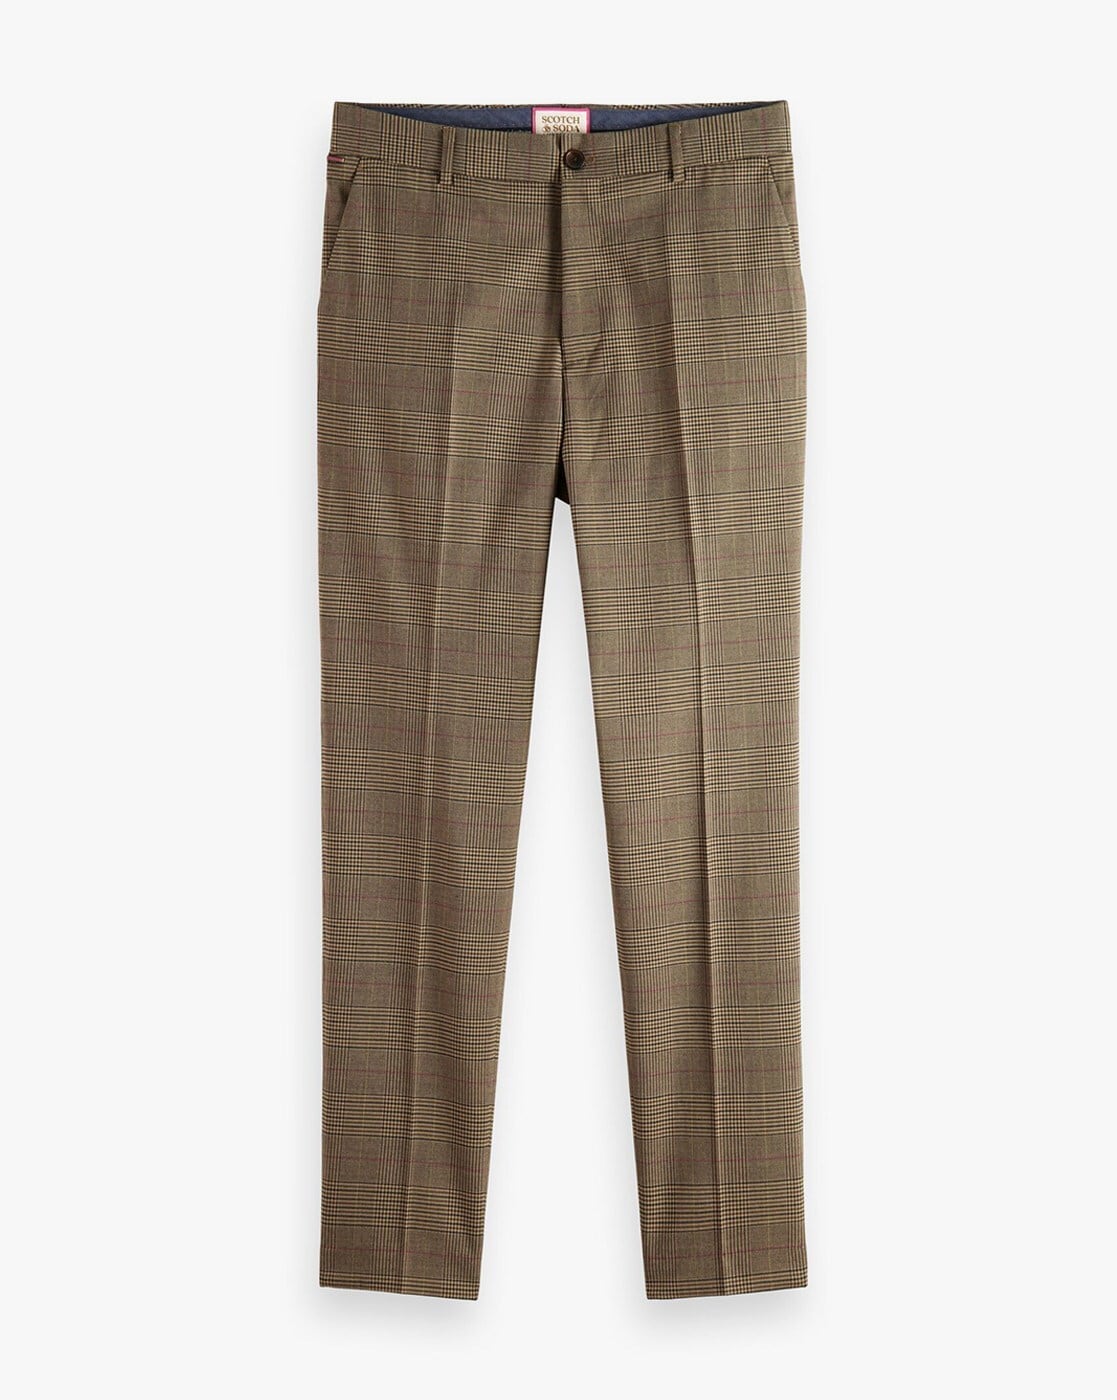 Scotch & Soda Lowry Mid-Rise Slim Sequin Trousers | The Summit at Fritz Farm